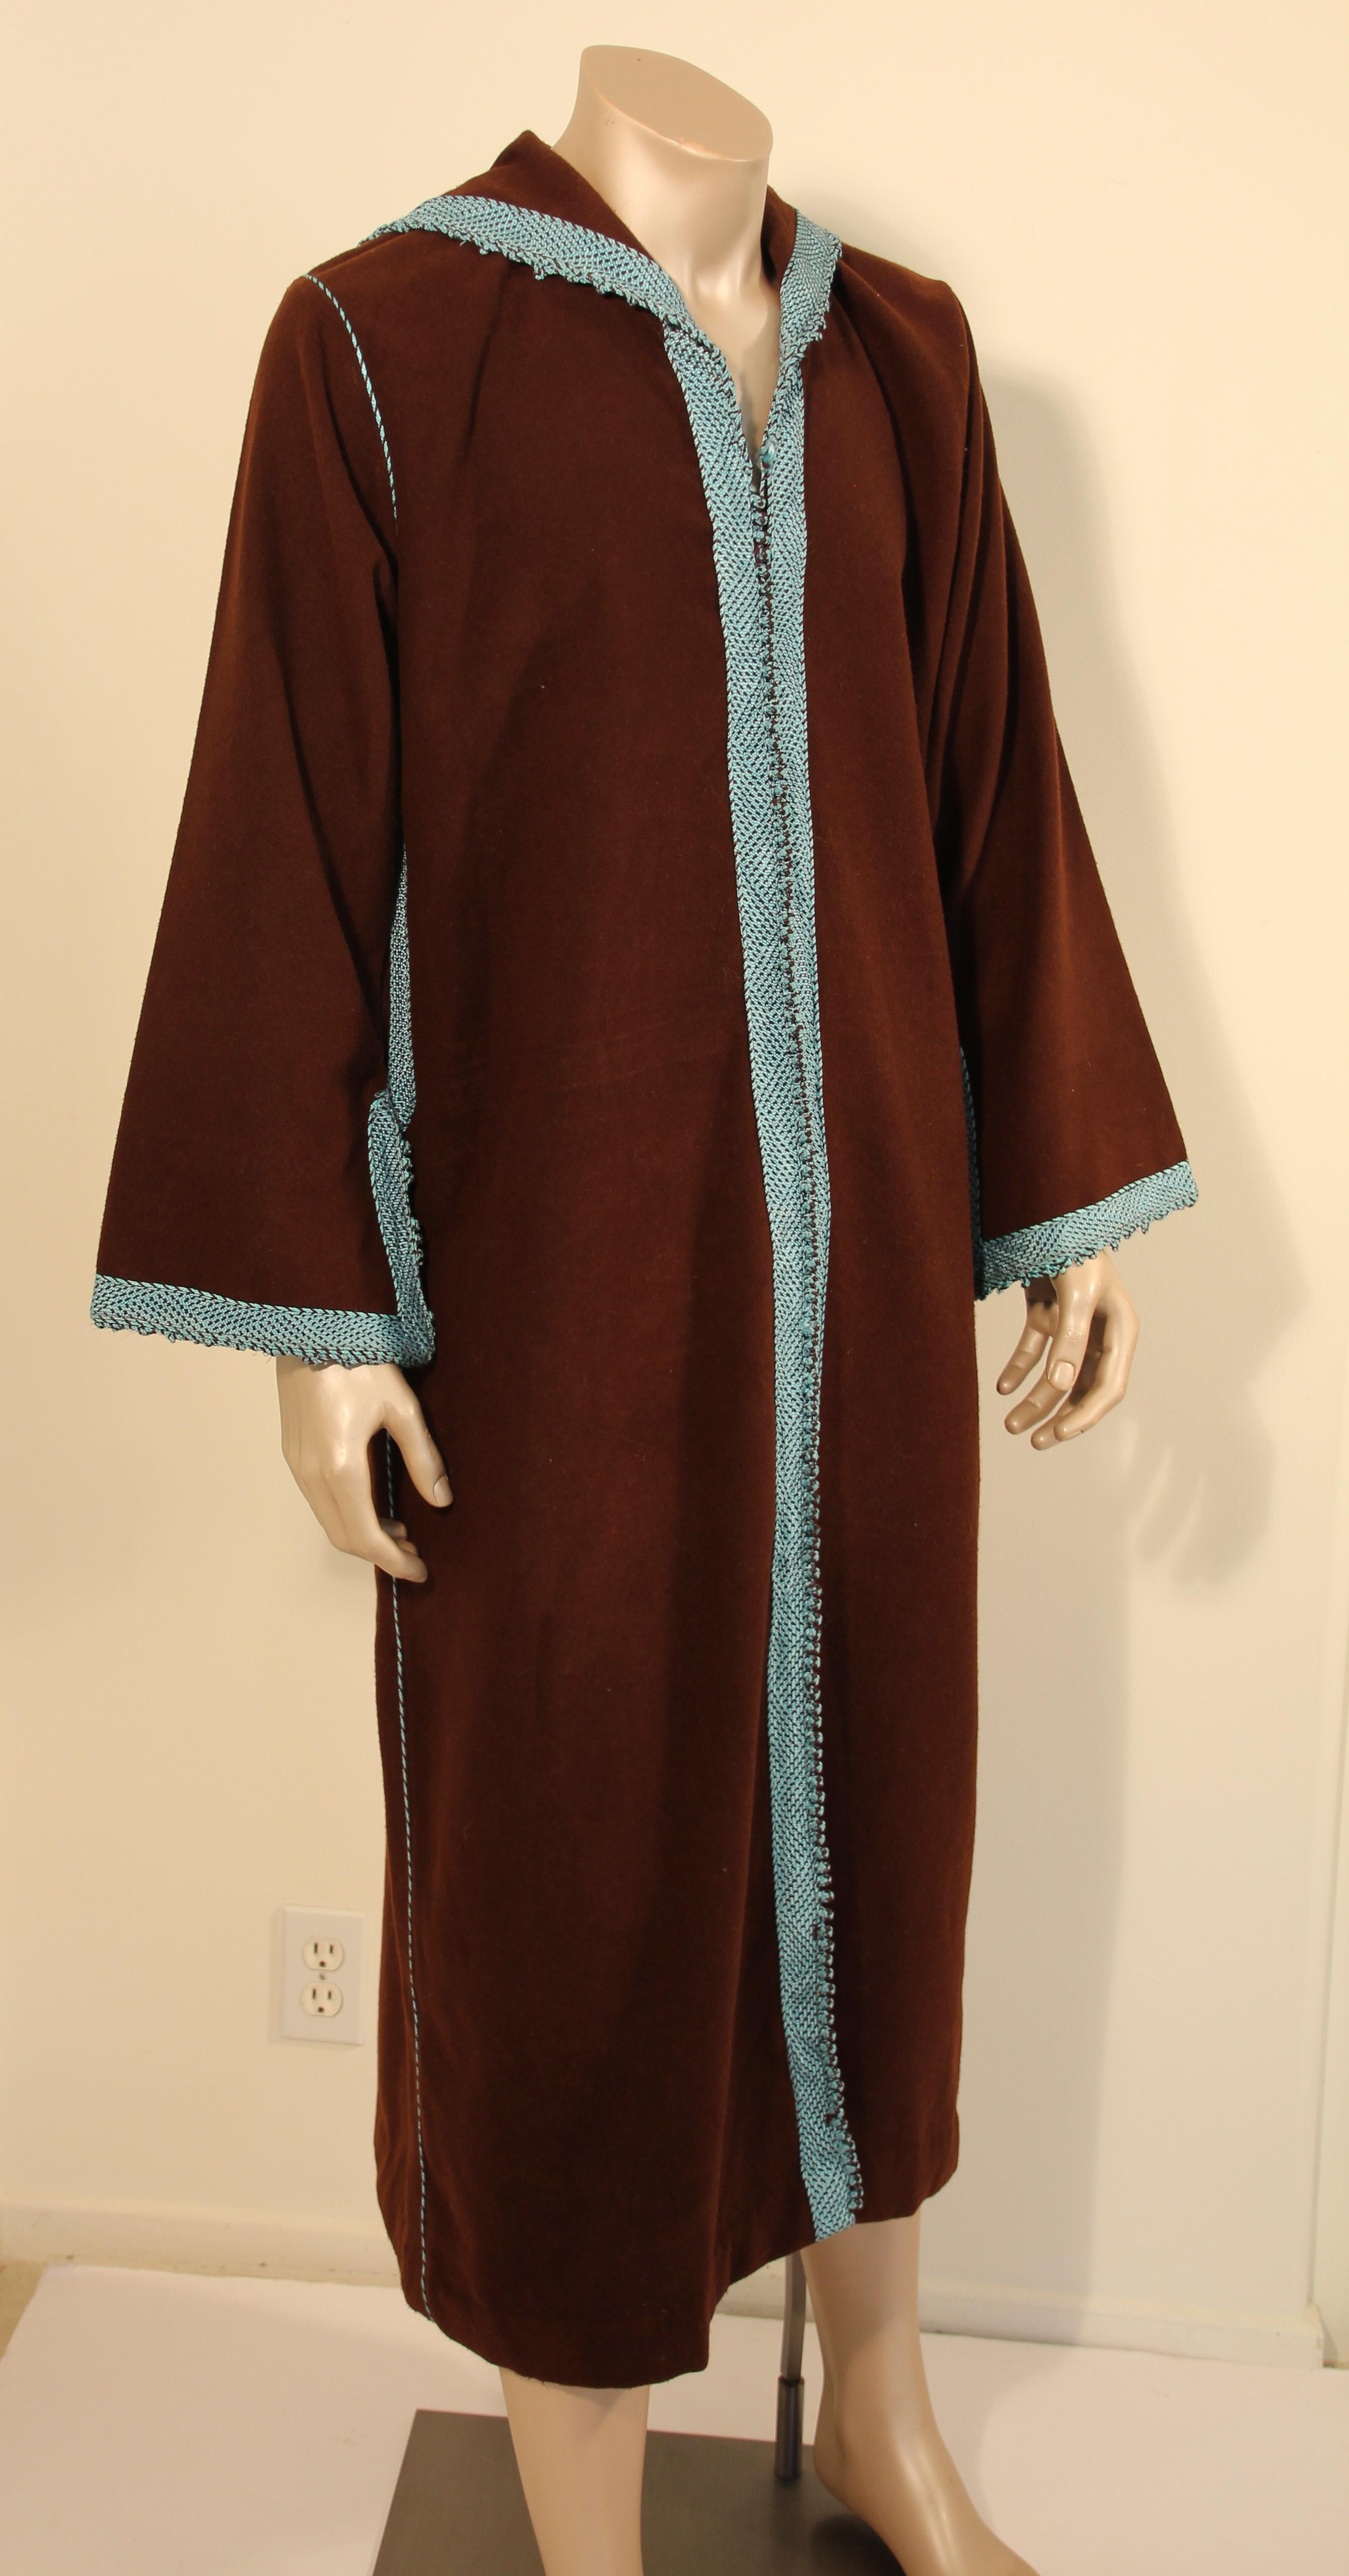 Handmade Moorish cashmere brown and turquoise long maxi dress caftan from North Africa, Morocco.
Vintage 1980s caftan robe.
Caftan with running down the center round braided buttons from the neckline to the hemline.
Fully front thread buttoning with